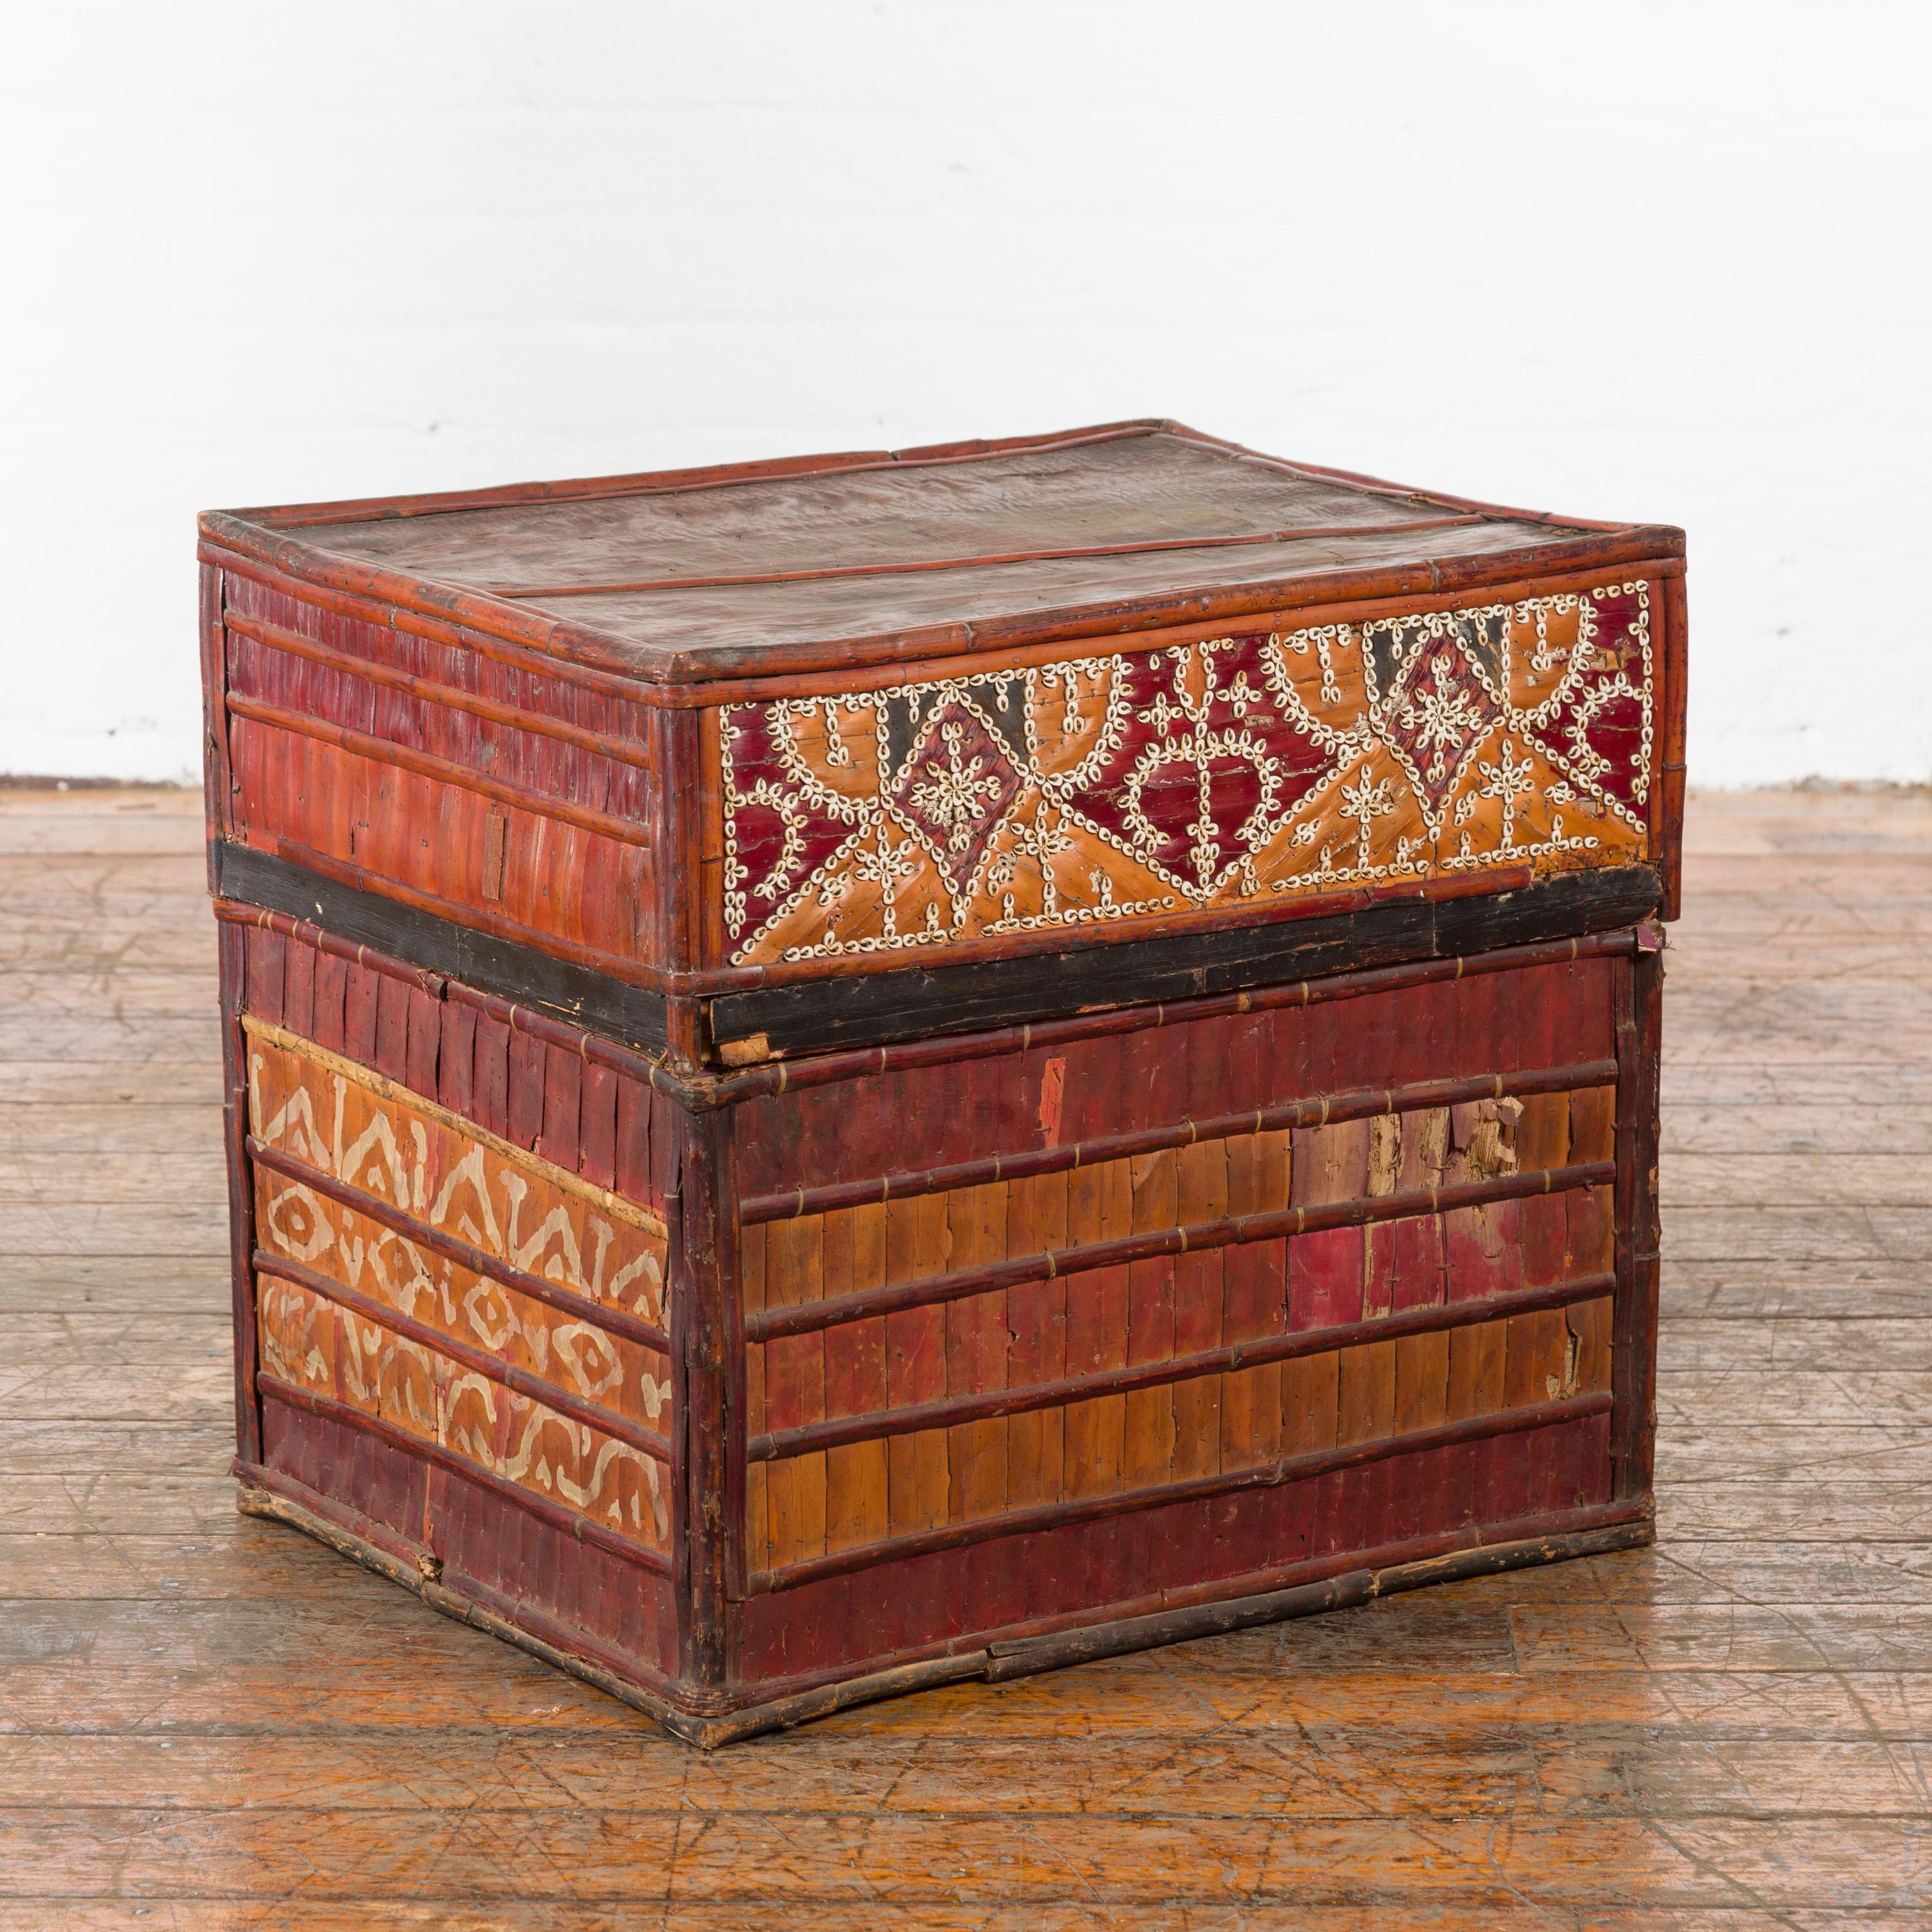 A Filipino tobacco leaf grain basket from the mid 20th century, with polychrome décor. Created in the Philippines during the midcentury period, this tobacco leaf grain basket features a rectangular lid adorned with a charming polychrome décor in the